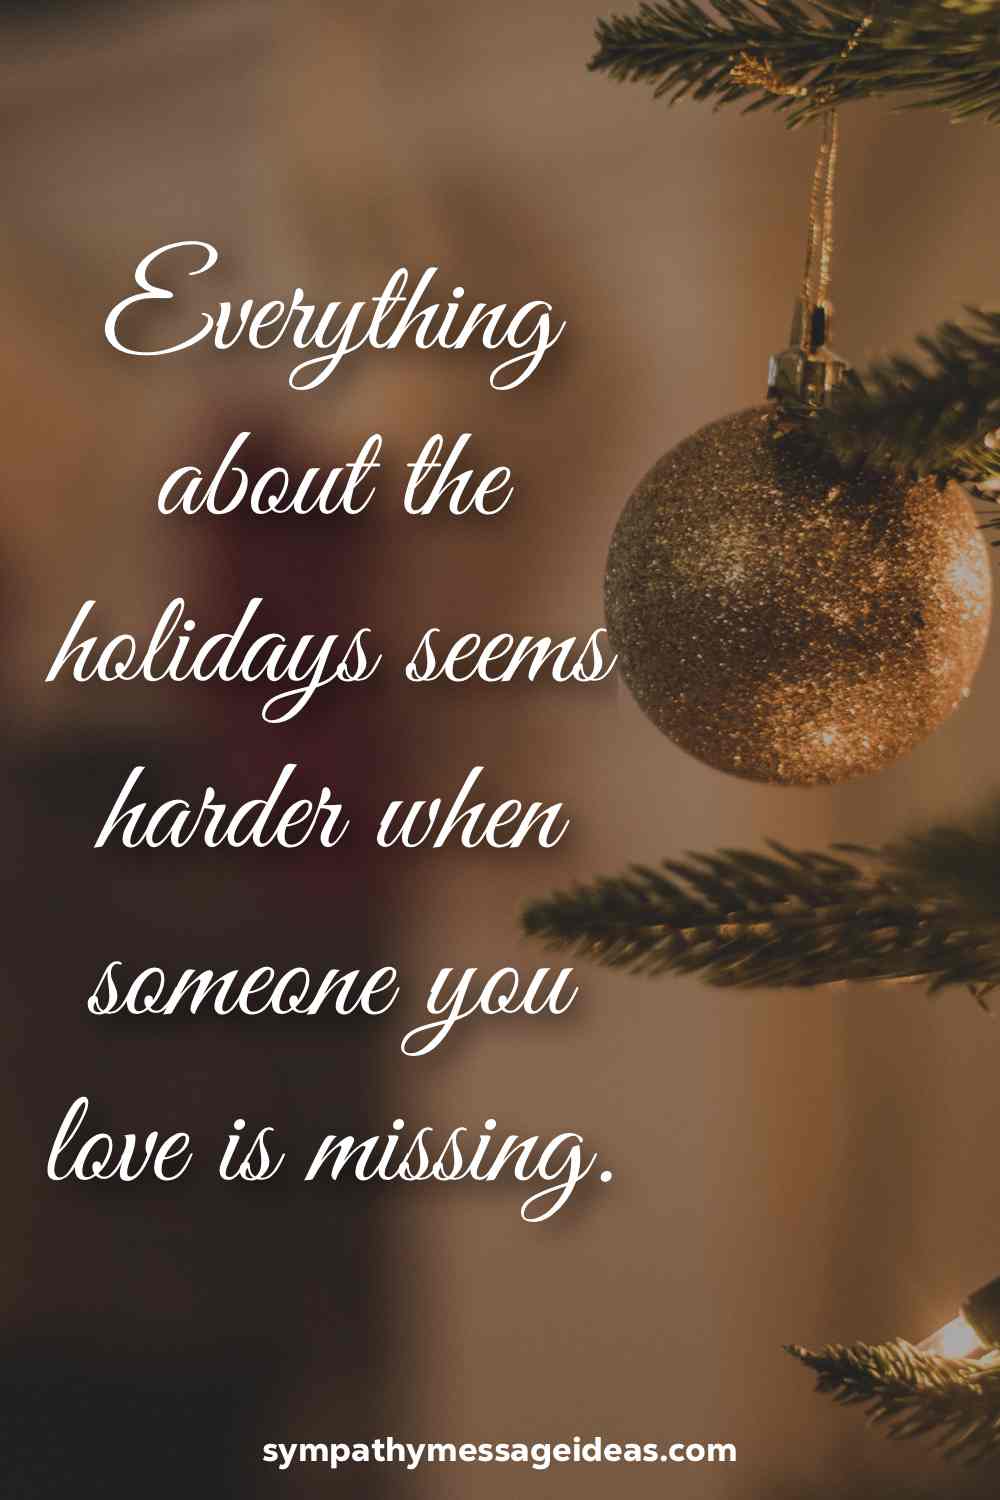 quote for grieving at christmas